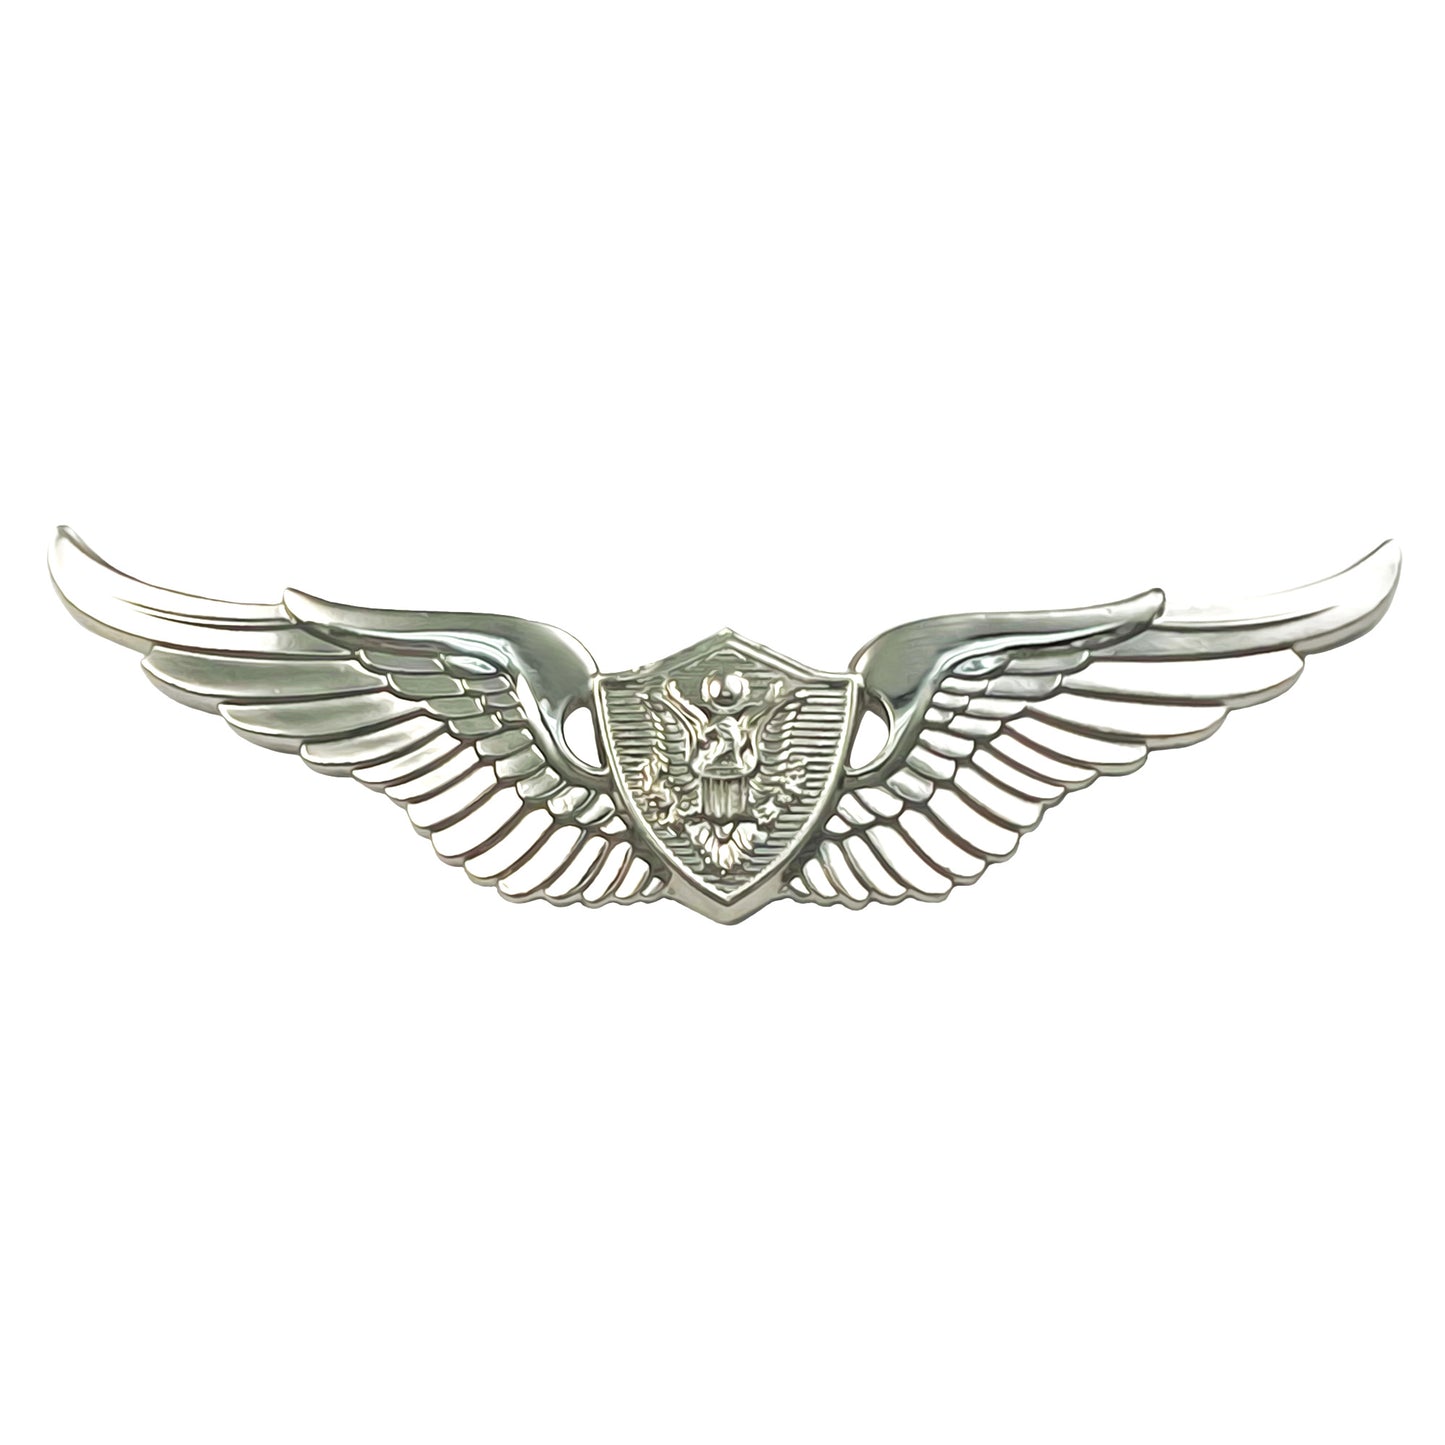 U.S. Army Aircrew Basic Full Size STA-BRITE Pin-on Badge